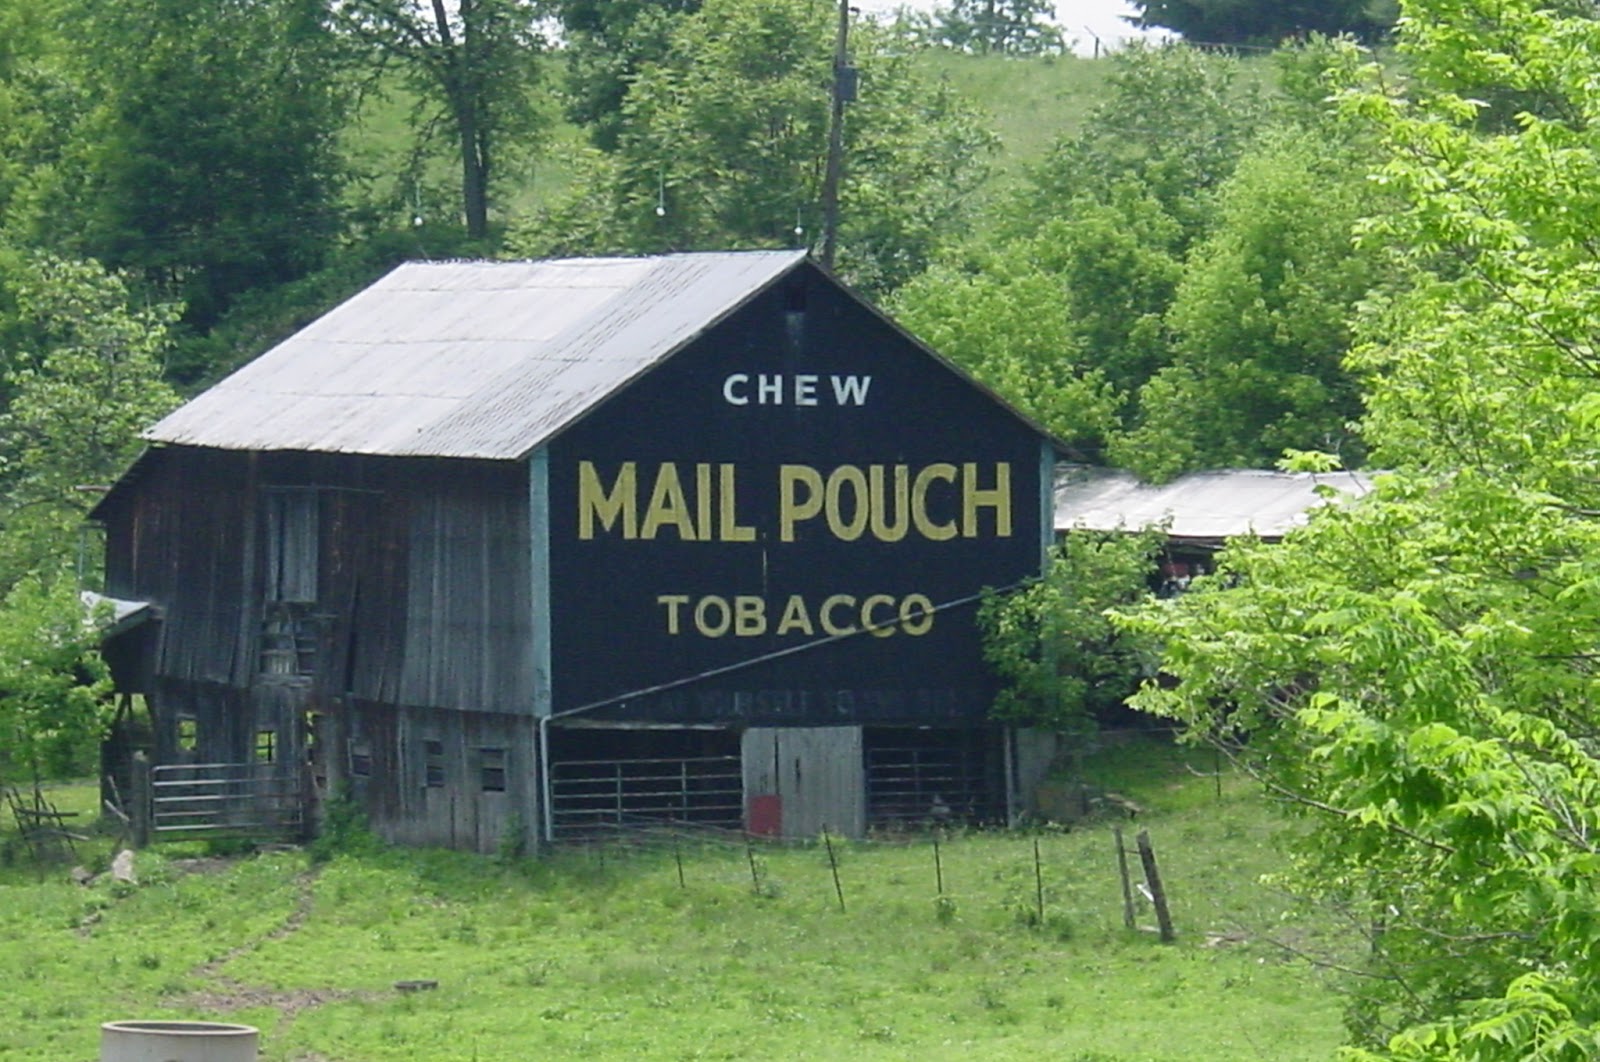 An old barn with Chew Mail Pouch Tobacco, painted in yellow on a black background. 